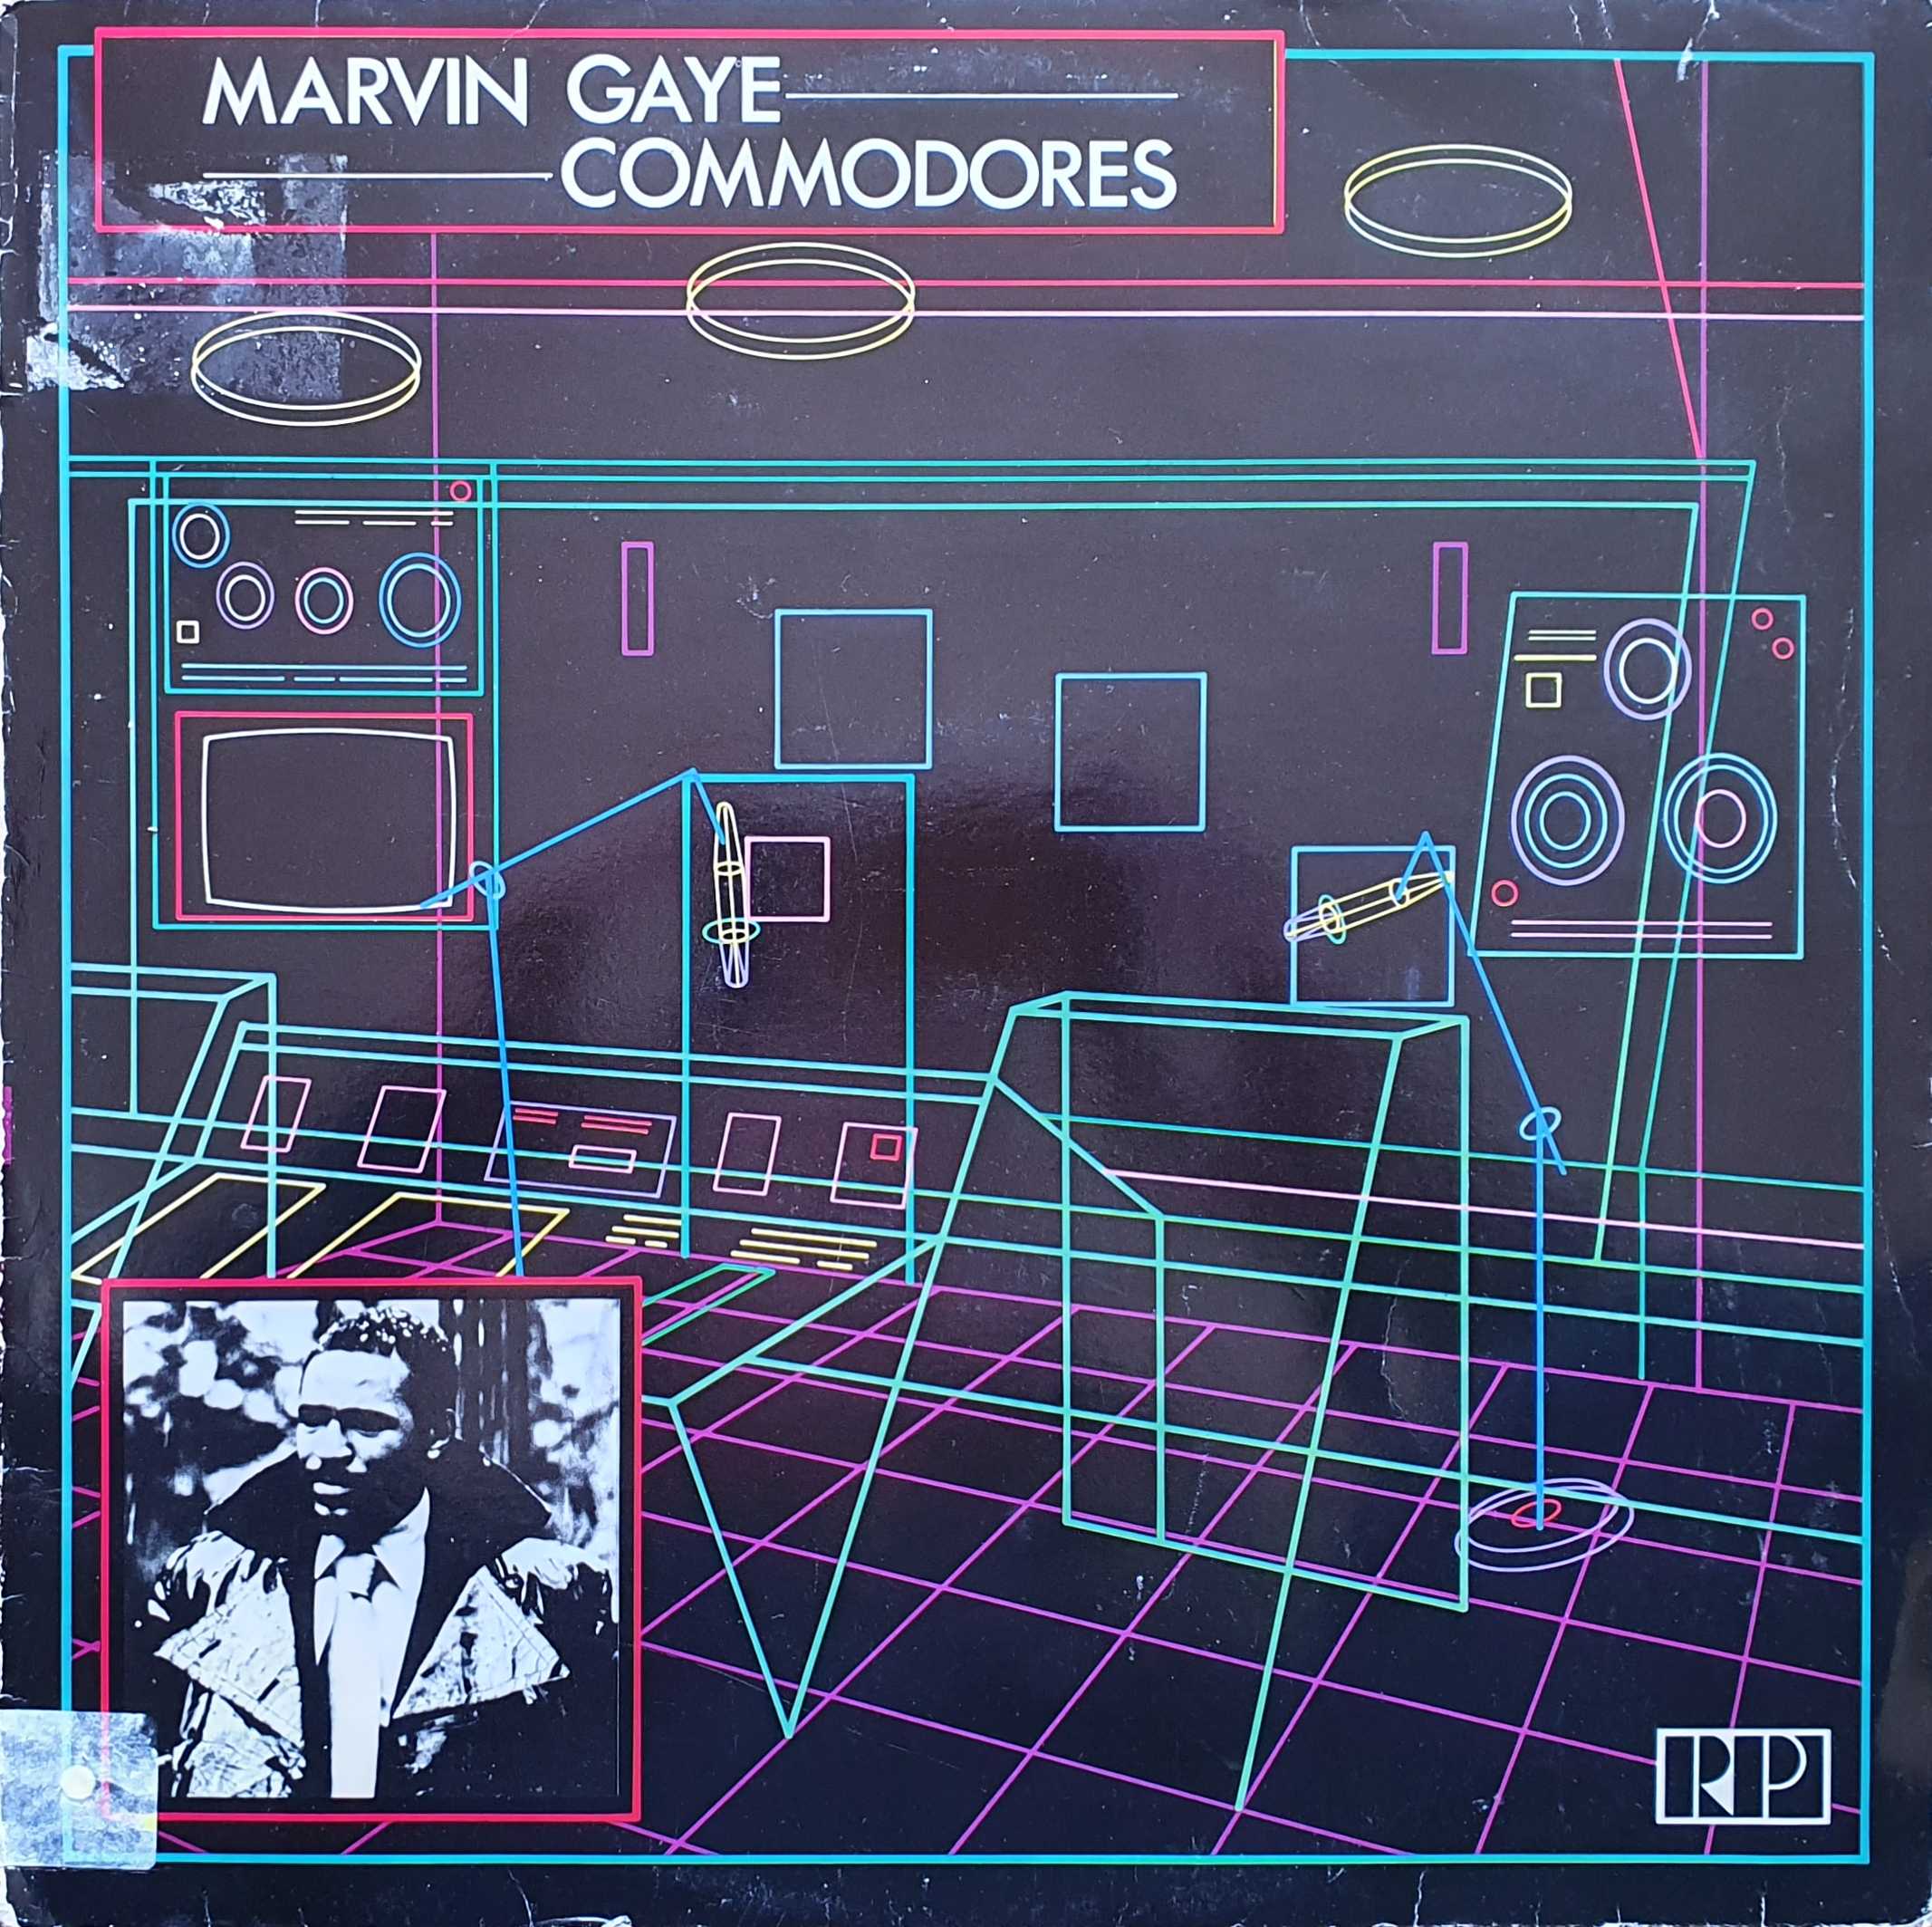 Picture of TAIR 85040 Marvin Gaye / Commodores by artist Marvin Gaye / Commodores from the BBC albums - Records and Tapes library